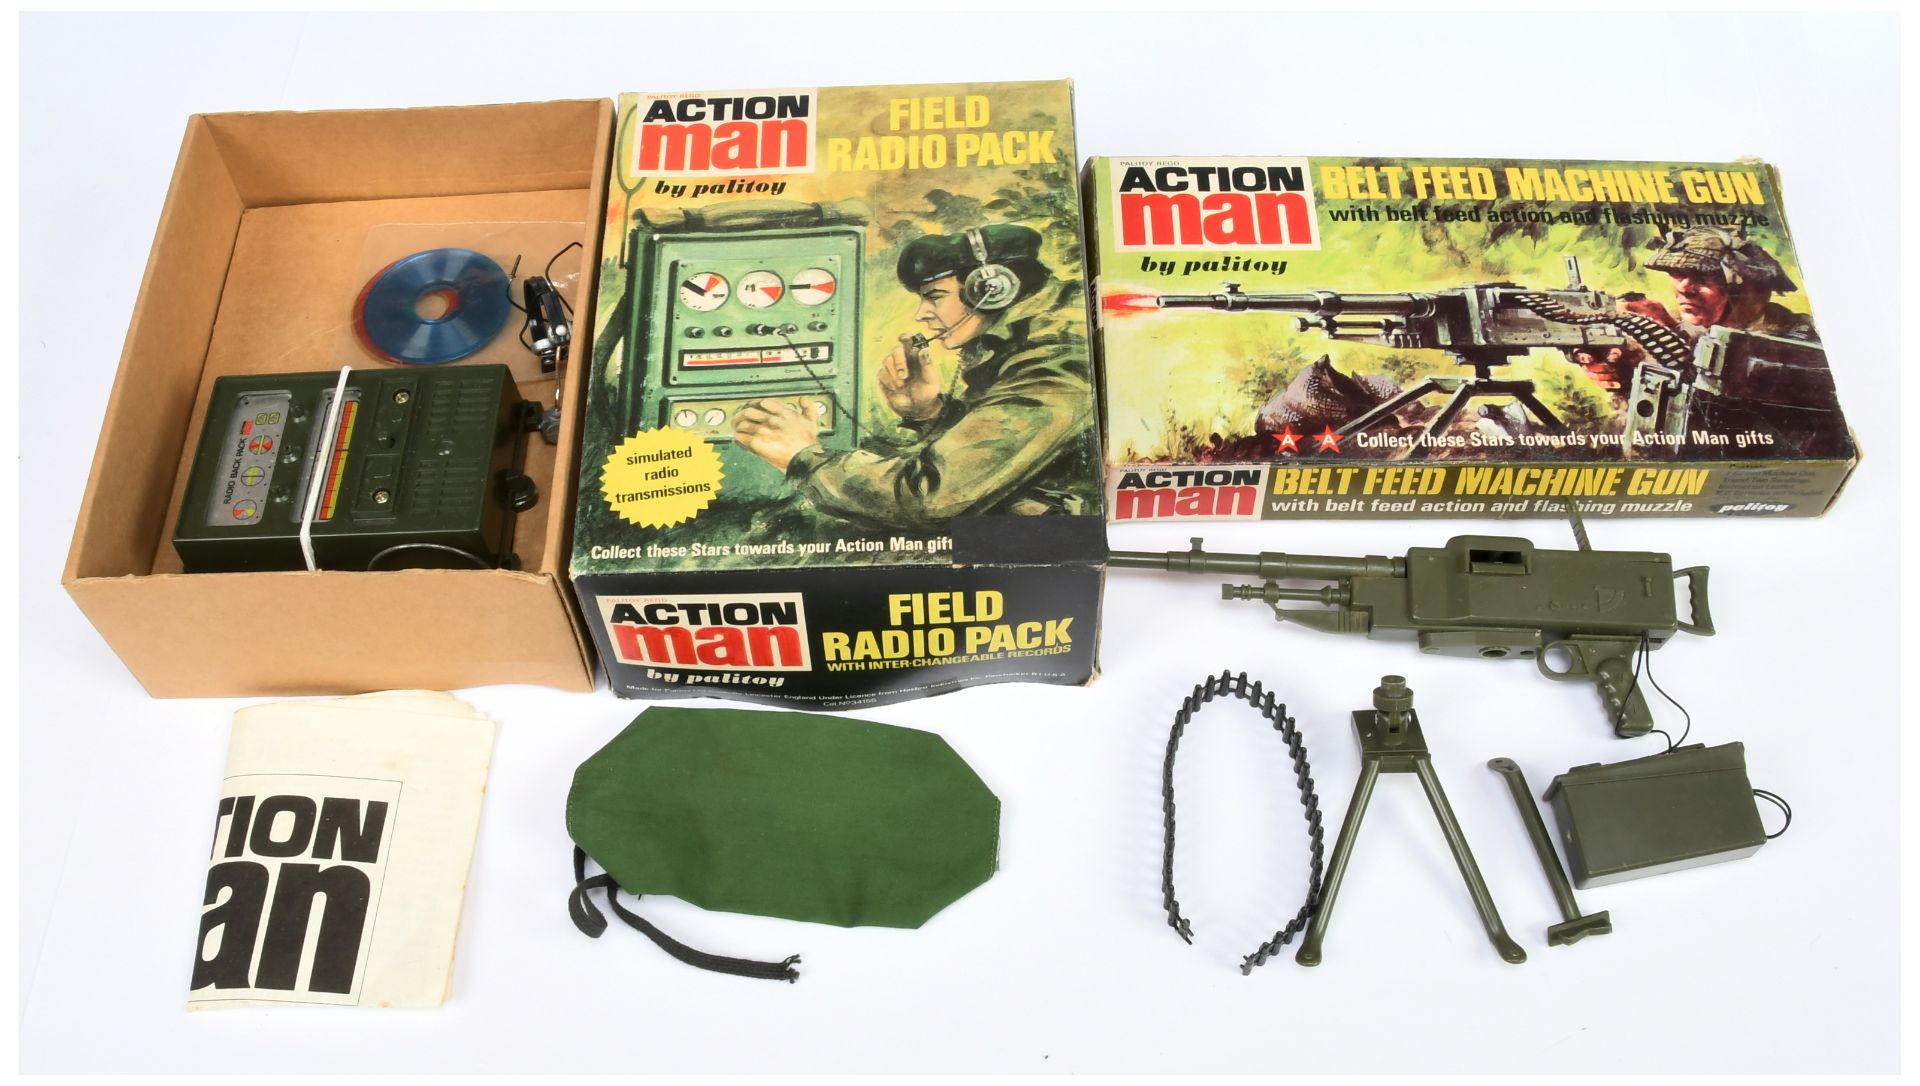 Palitoy Action Man vintage Field Radio Pack, not tested and not checked for completeness - Good P...